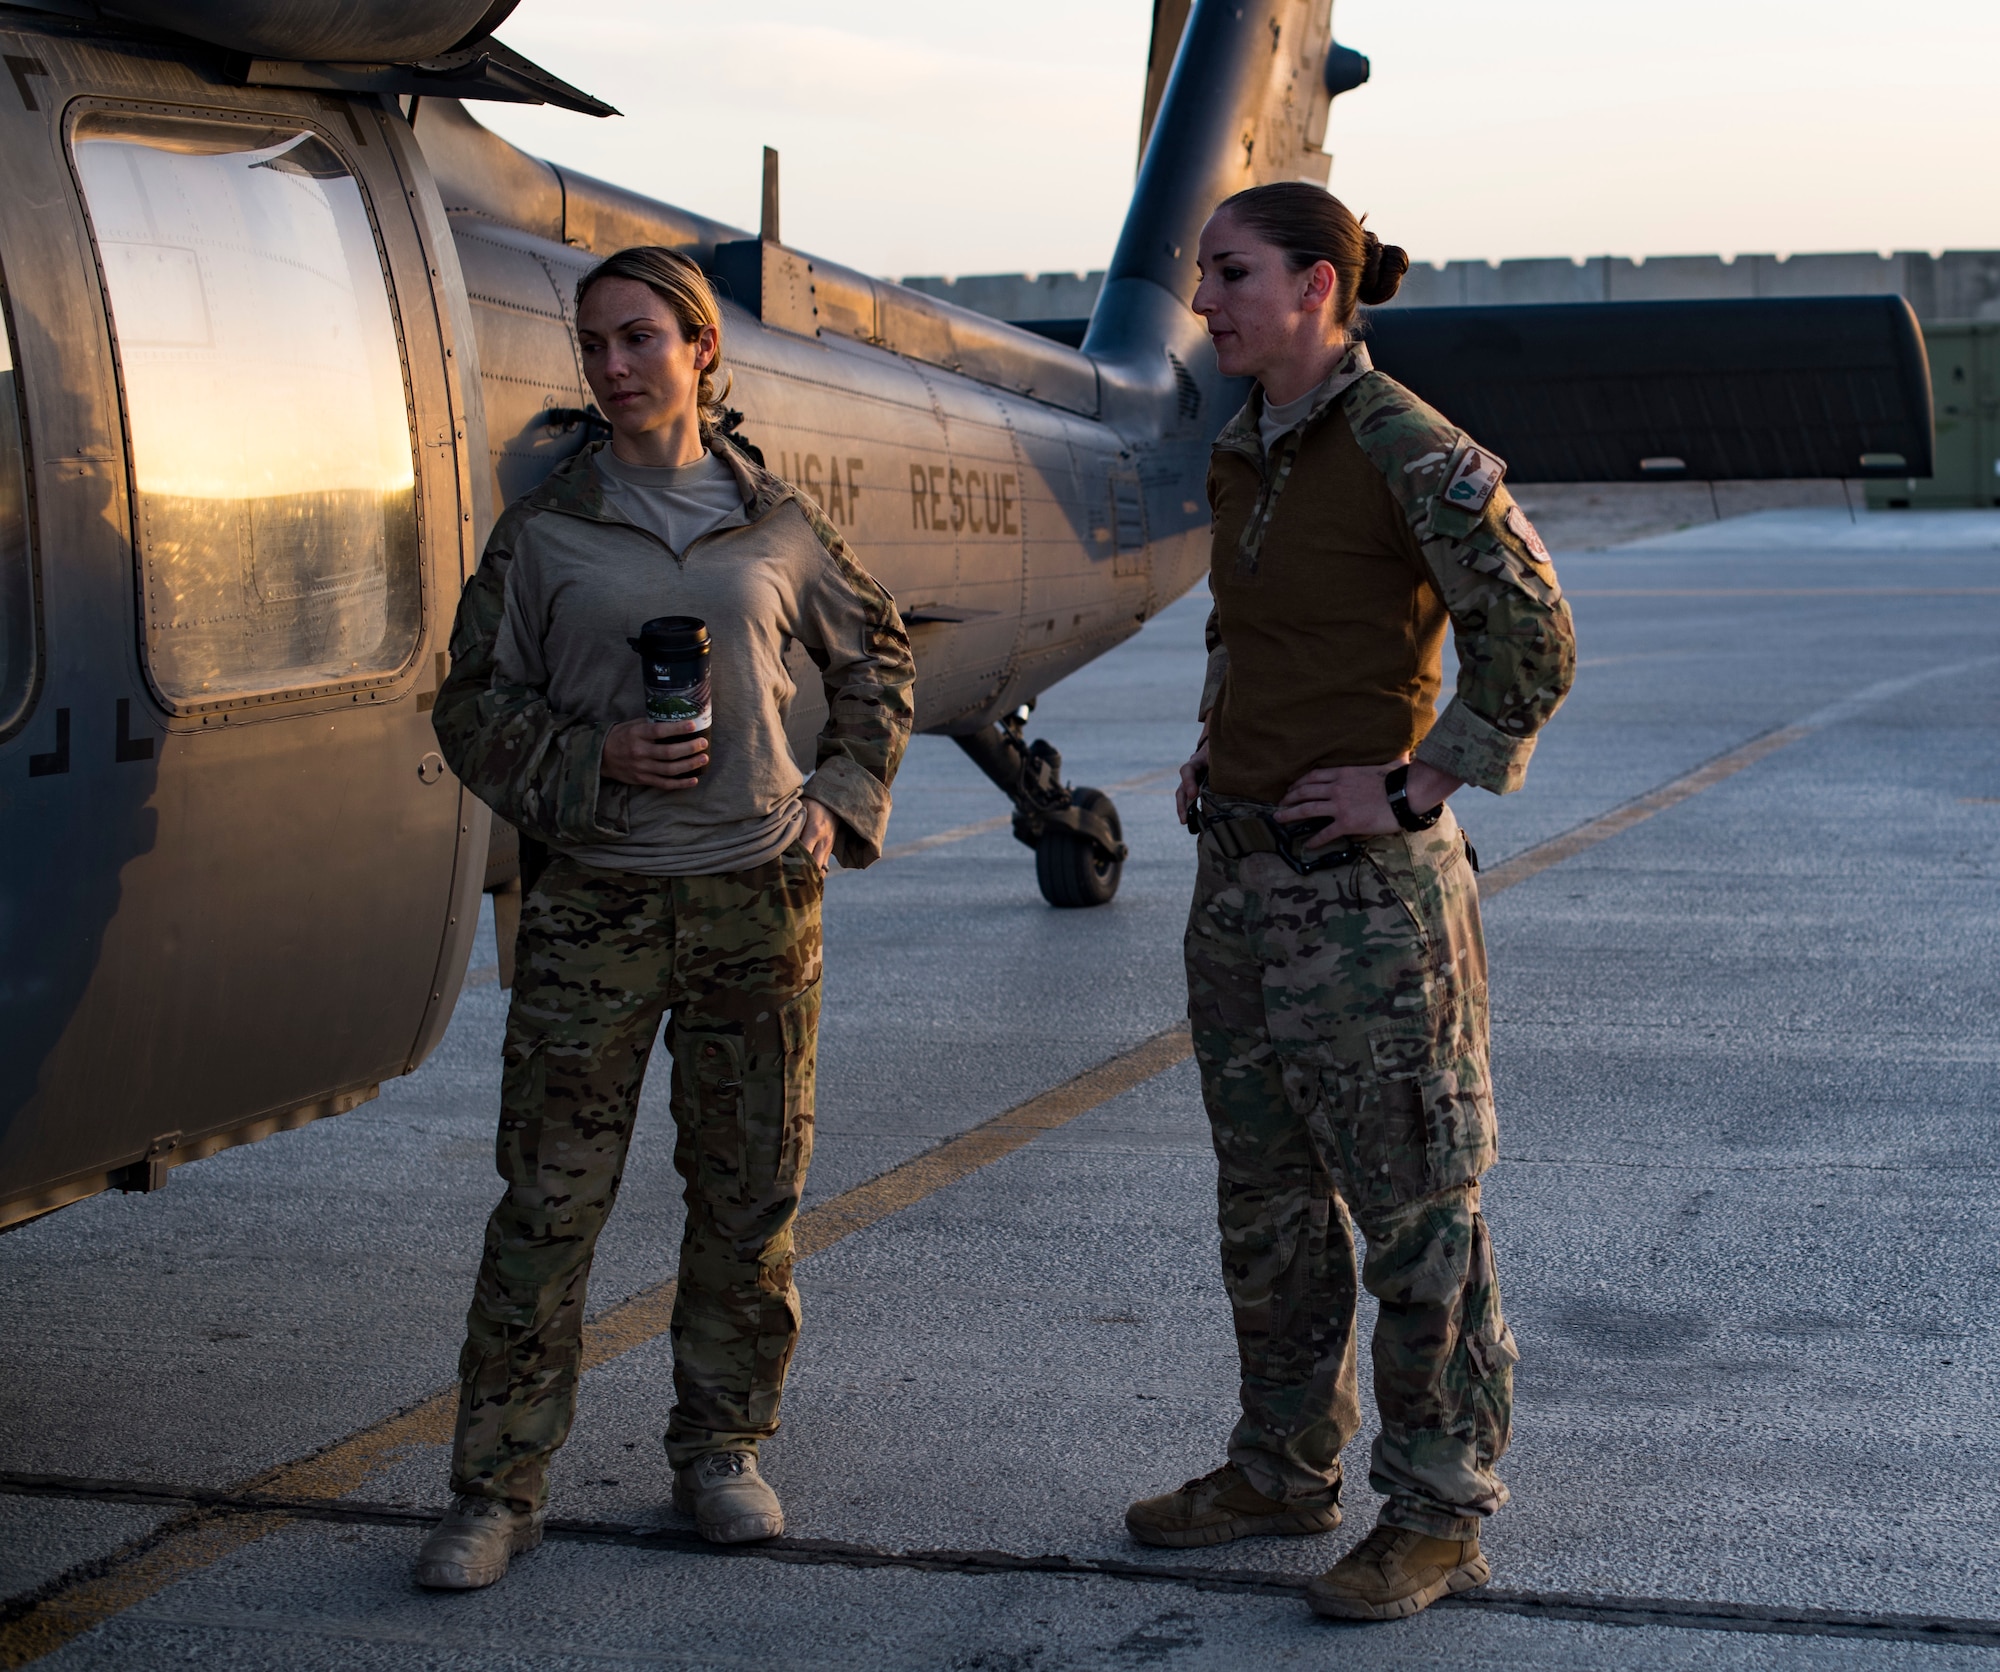 U.S. Air Force Maj. Margaret McCord, commander of the 33rd Expeditionary Rescue Squadron, and Capt. Victoria Snow, HH-60G Pave Hawk pilot assigned to the 33rd ERQS, discuss tactics in front of the aircraft after training mission with a Guardian Angel team assigned to the 308th ERQS, Kandahar Airfield, Afghanistan, March 13, 2018.